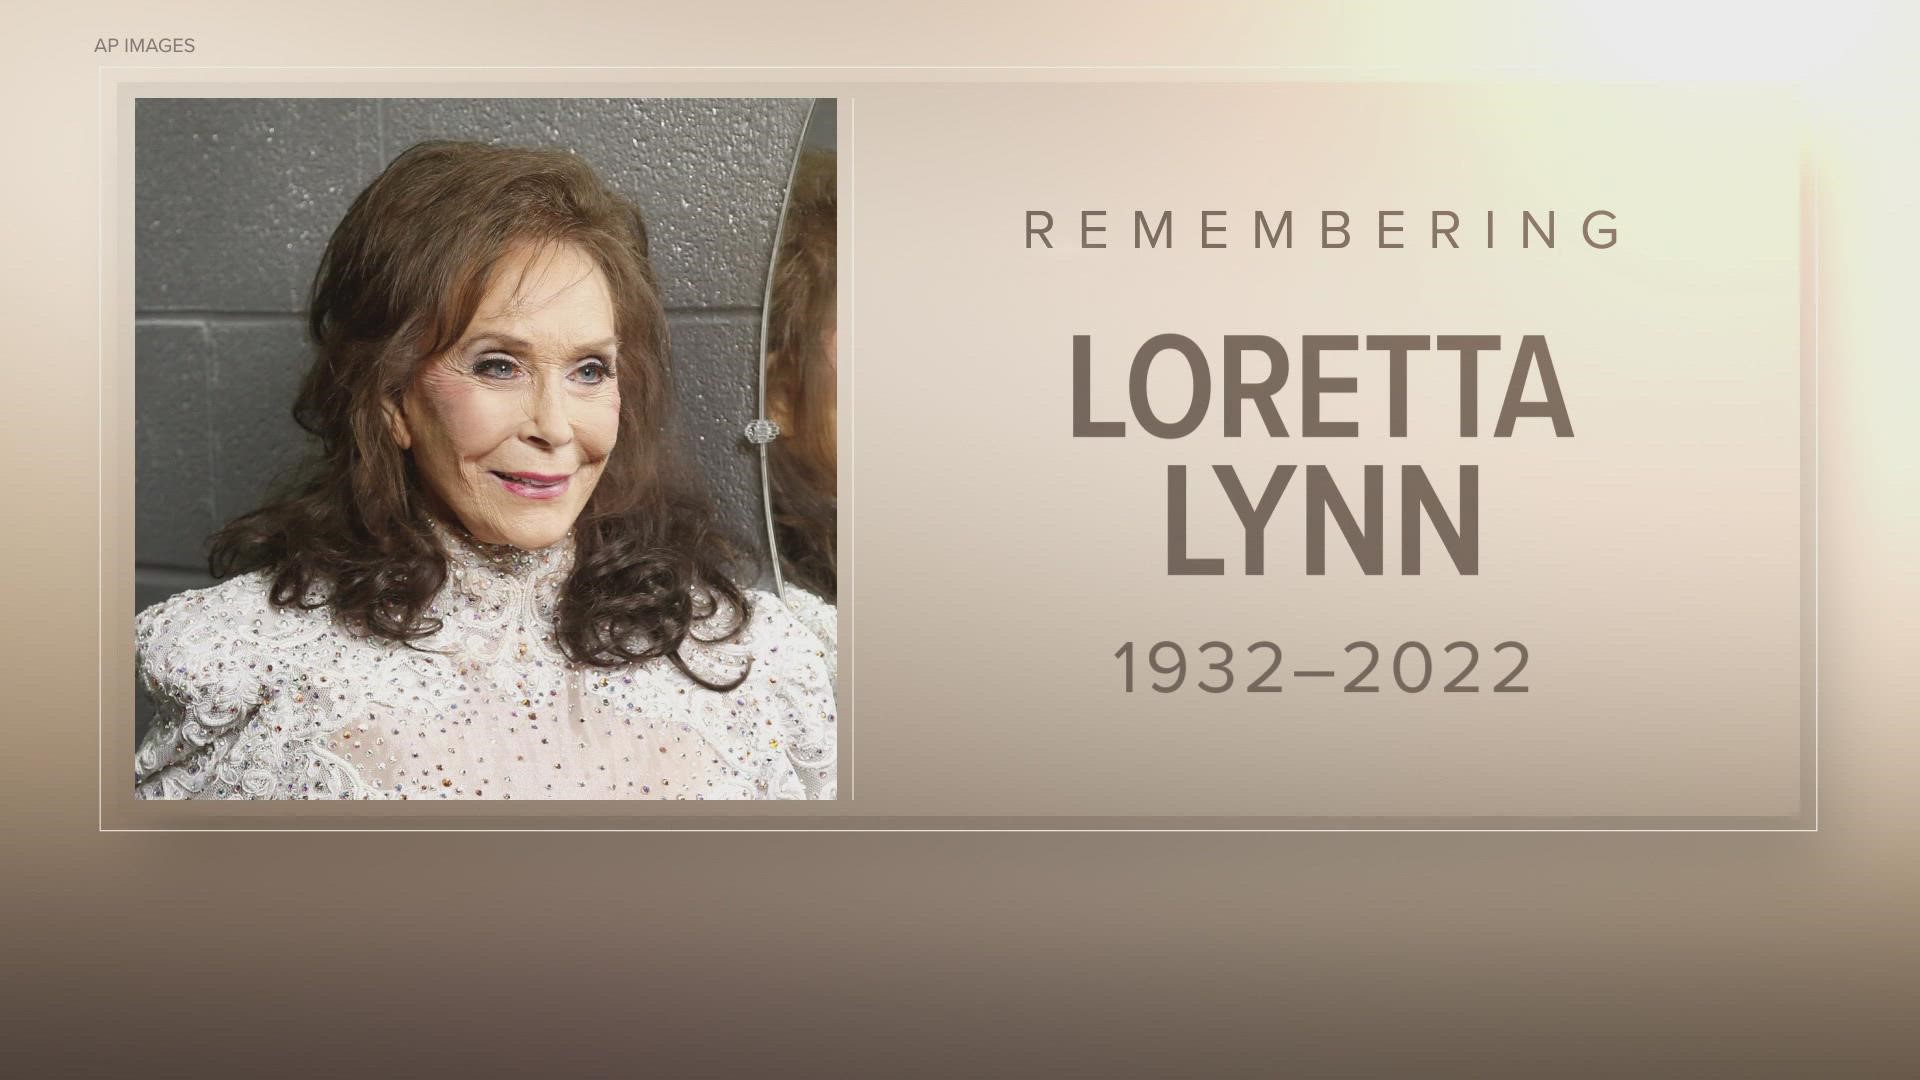 Loretta's death sparked reactions from the music world including Dolly Parton.